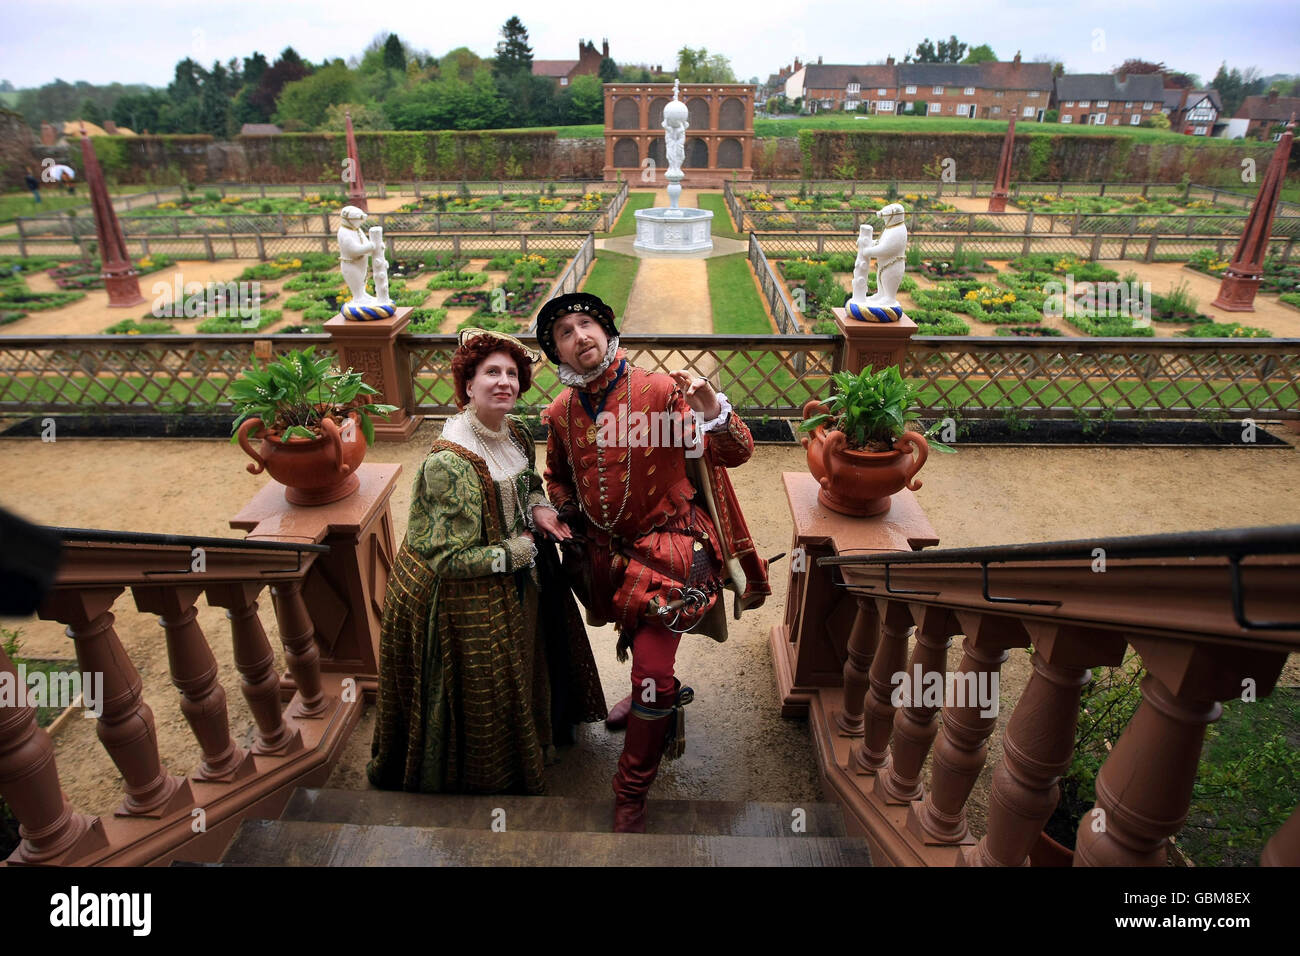 Charles Neville, dressed as Robert Dudley, 1st Earl of Leicester, and Hilary Janewood, dressed as Queen Elizabeth I, inspect the reconstruction of Kenilworth Castle gardens, which were originally commissioned by the Earl of Leicester to impress Queen Elizabeth I in 1575. Stock Photo